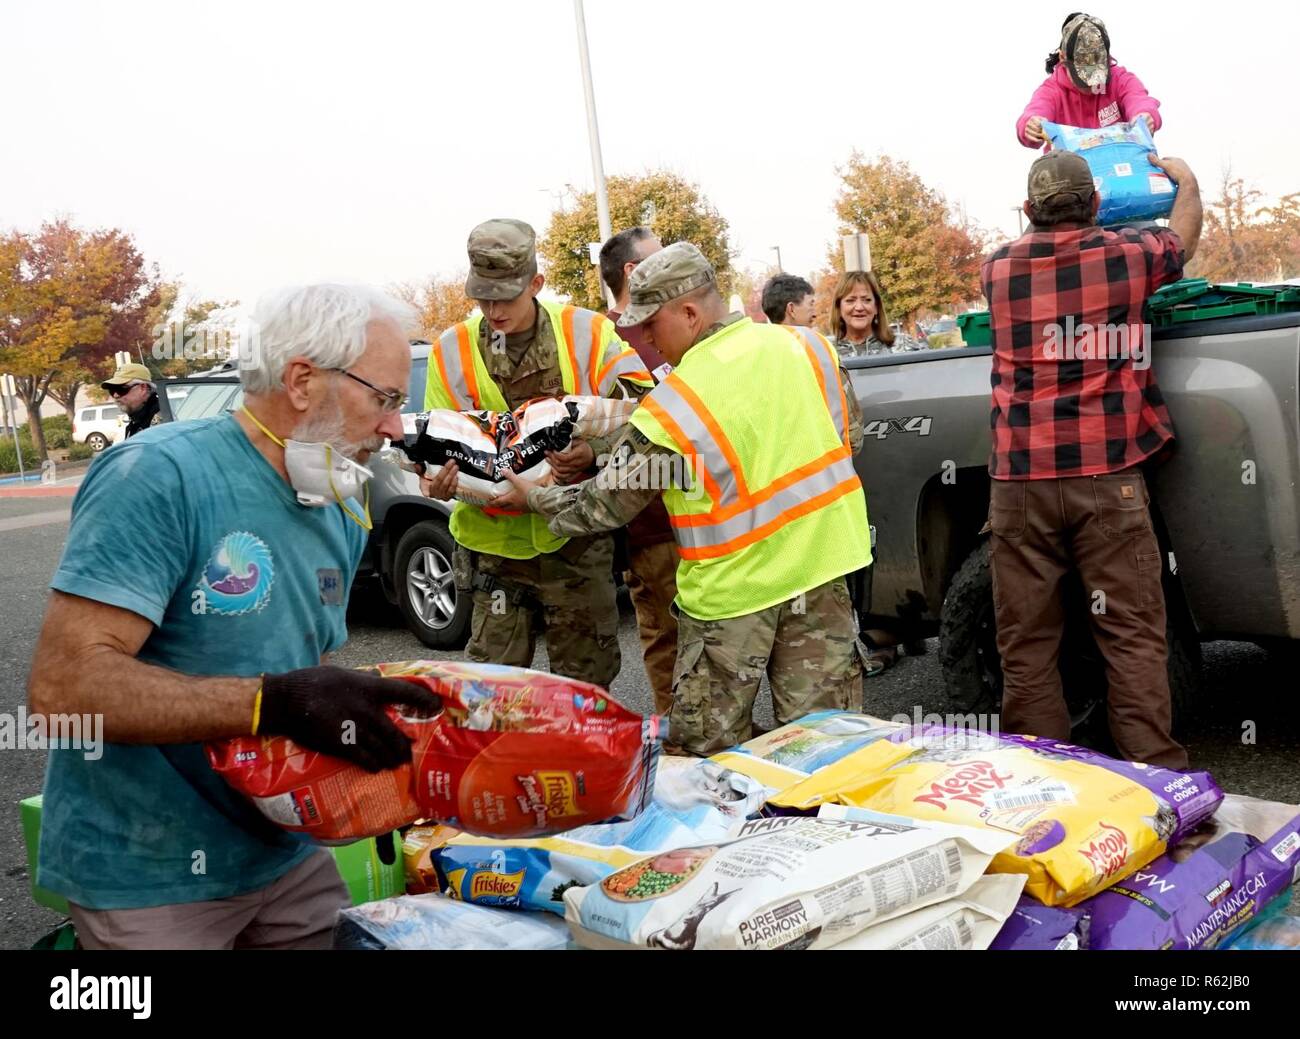 Spc. Mark Maynard and Pfc. Christian P. Reinke, military police officers with the 870th Military Police Company, helps local community members unload donations at a temporary animal shelter at the municipal airport in Chico, California, Nov. 18, 2018. In response to the Camp Fire, the airport has been converted to a temporary animal shelter, caring for displaced animals and providing donations to pet owners in need. Stock Photo